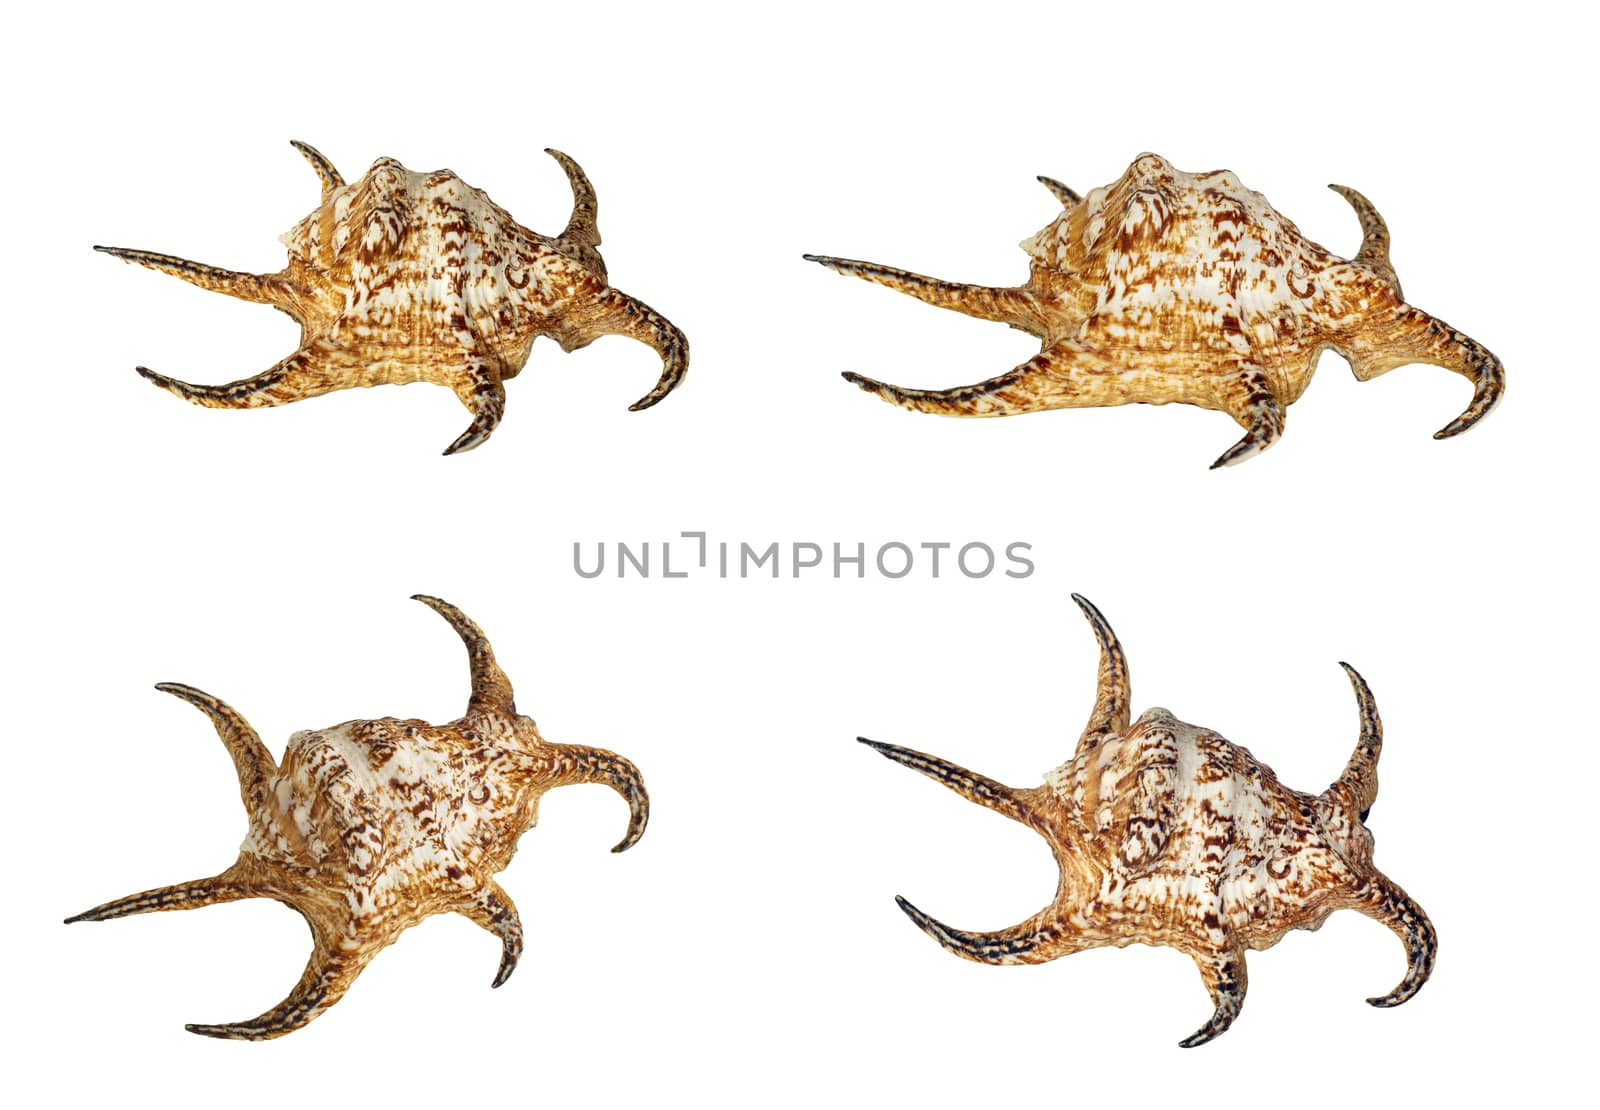 Set of Sea shell isolated on a white background. Lambis is a genus of large sea snails sometimes known as spider conchs, marine gastropod mollusks in the family Strombidae. In different angles.